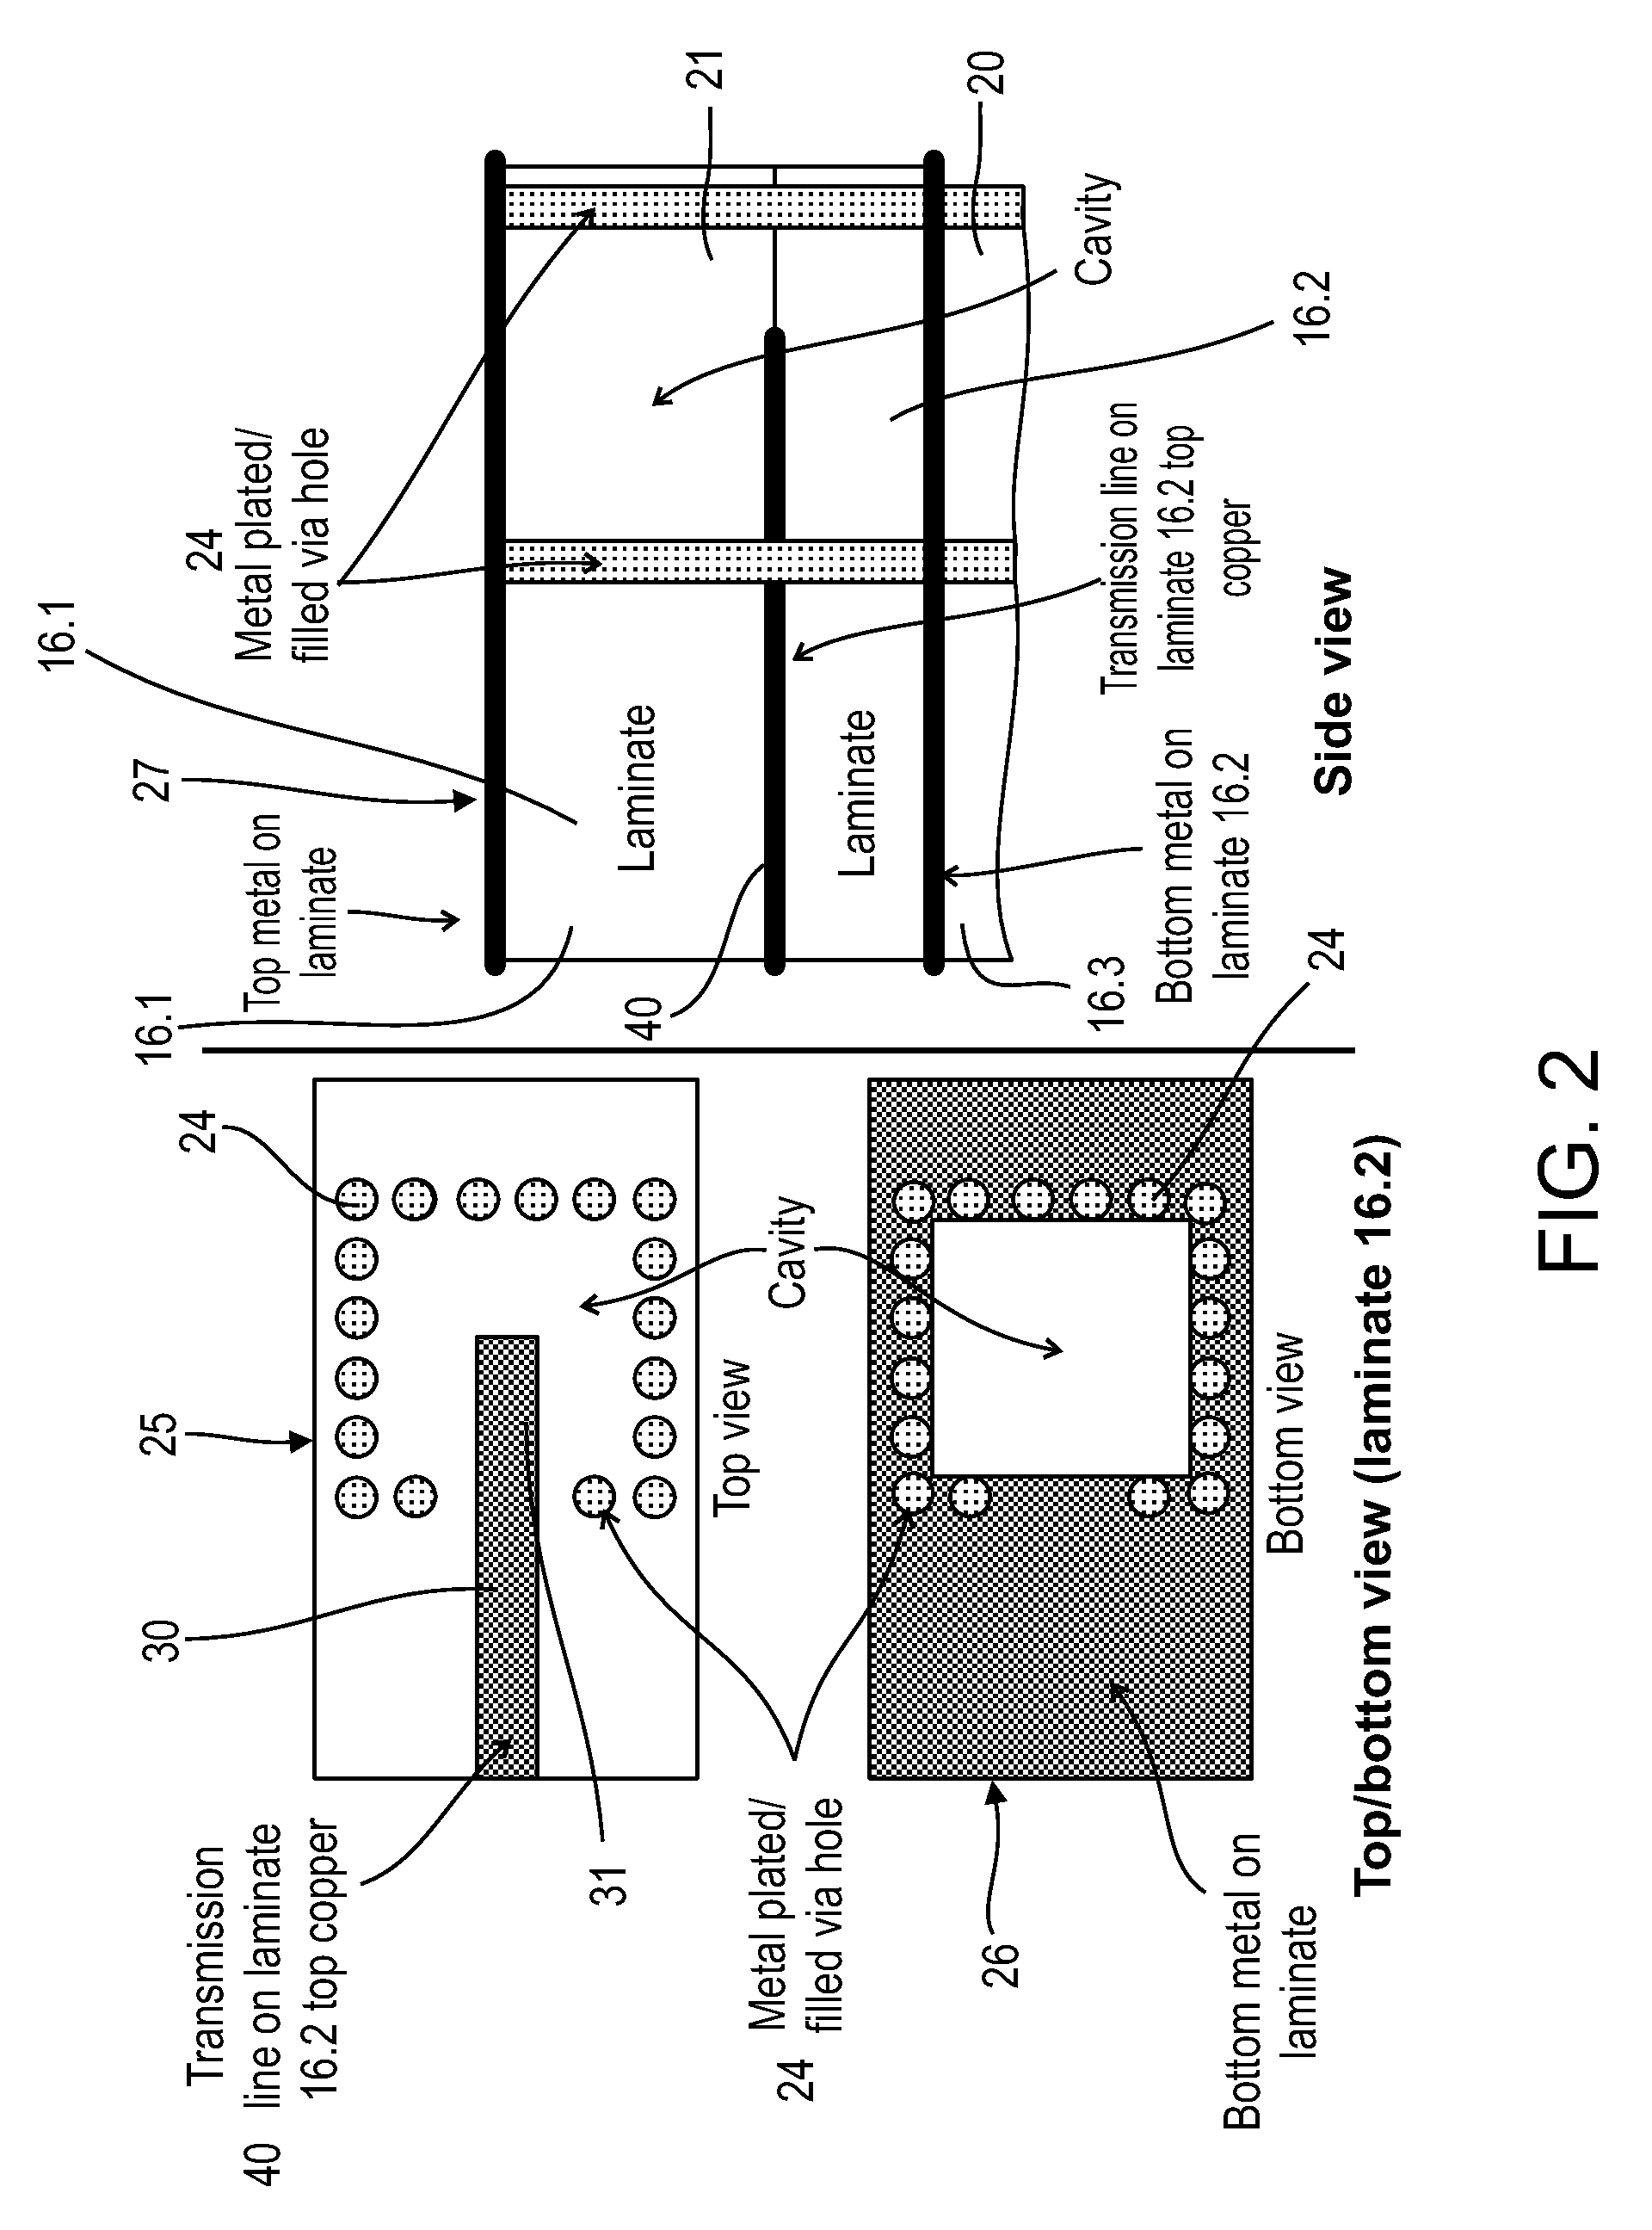 Packaging for a millimeter wave radio-frequency integrated circuit (RFIC)